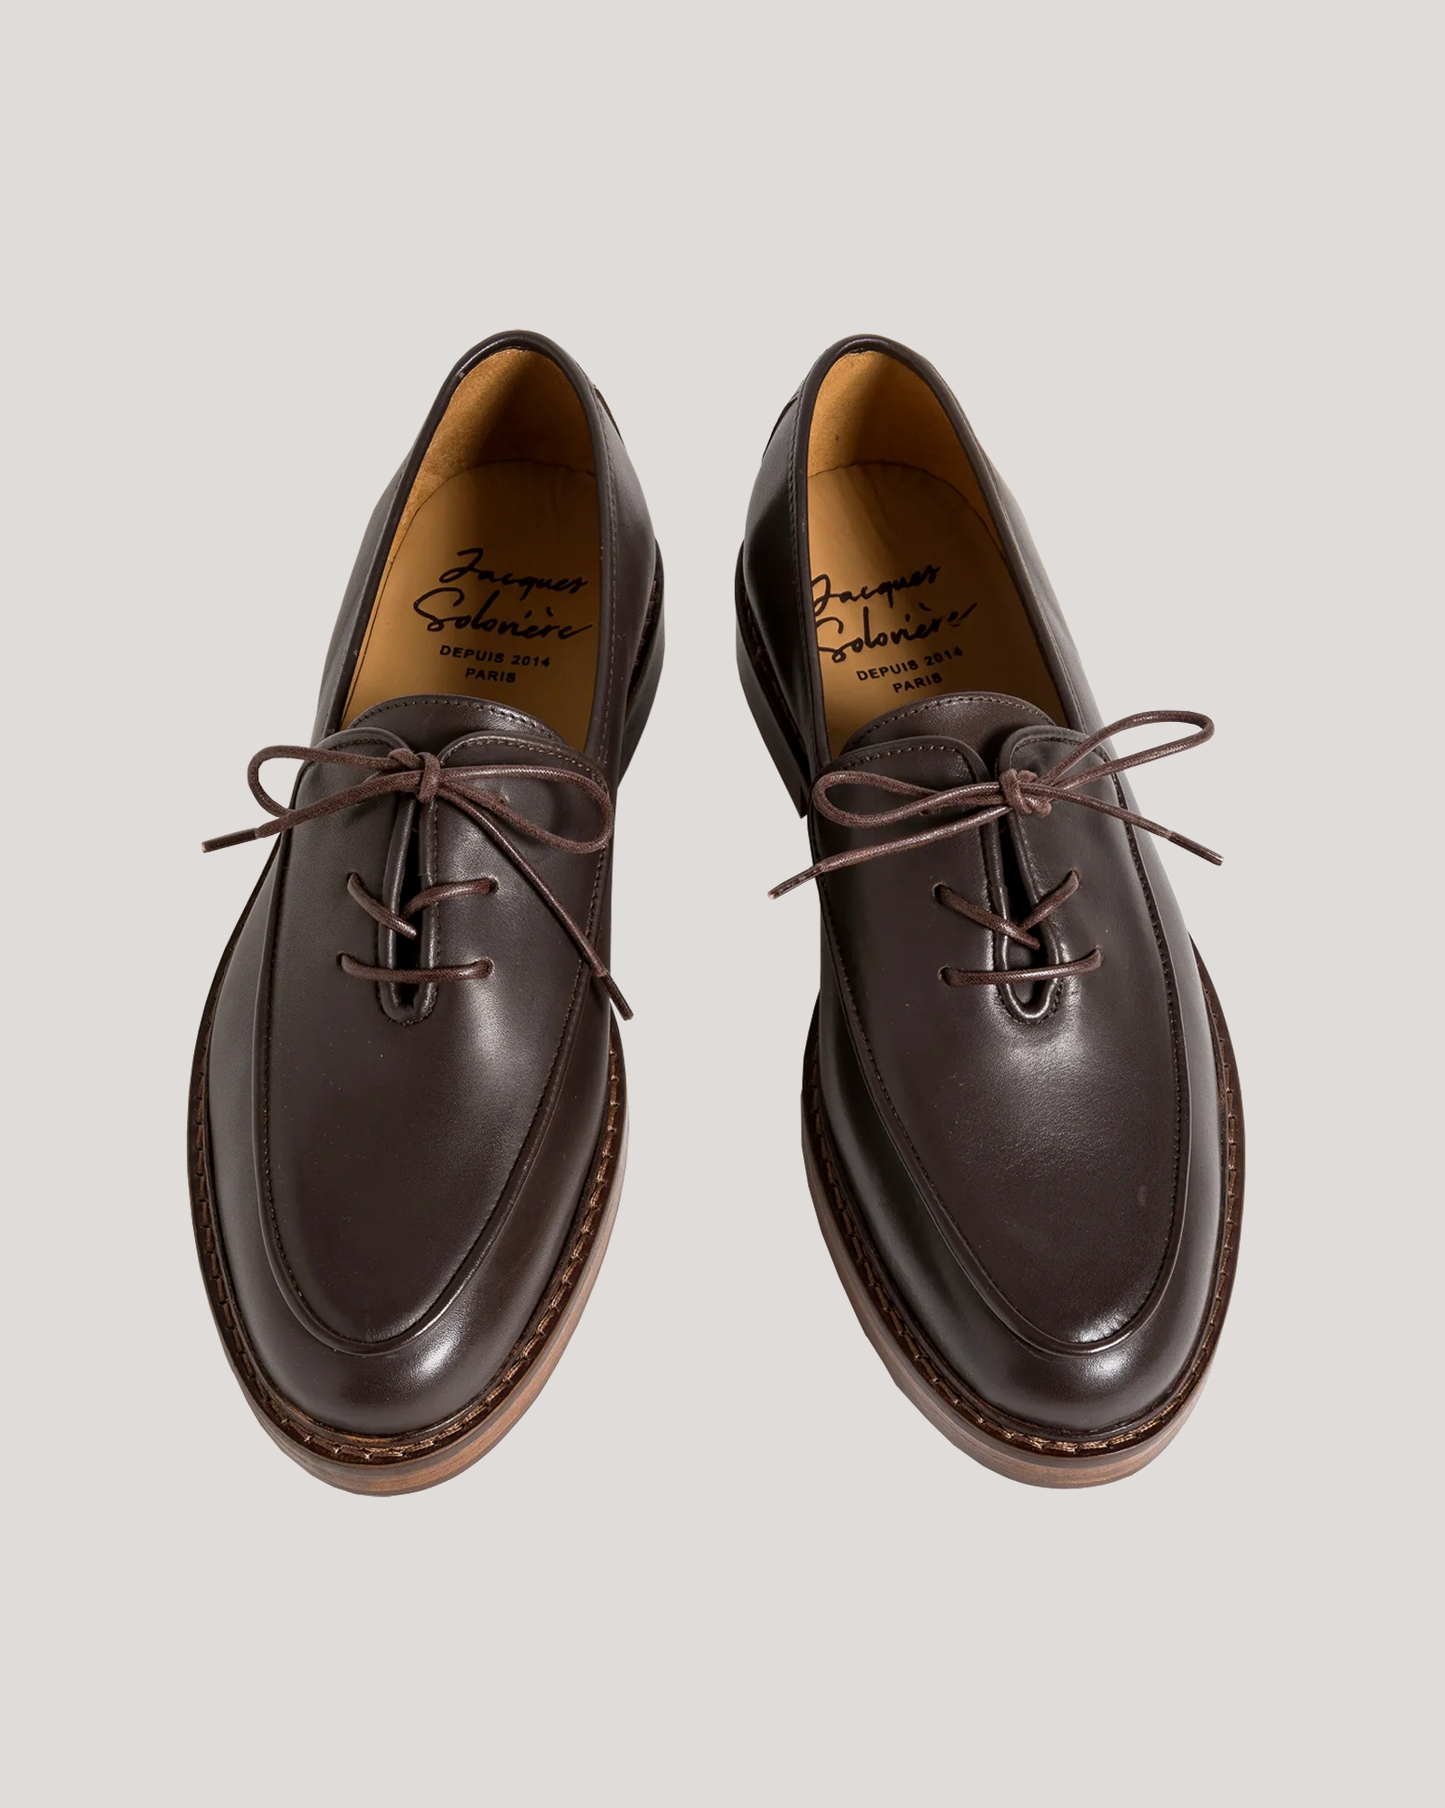 JACQUES SOLOVIERE OLI LEATHER DERBY RUBBER SOLE SHOE